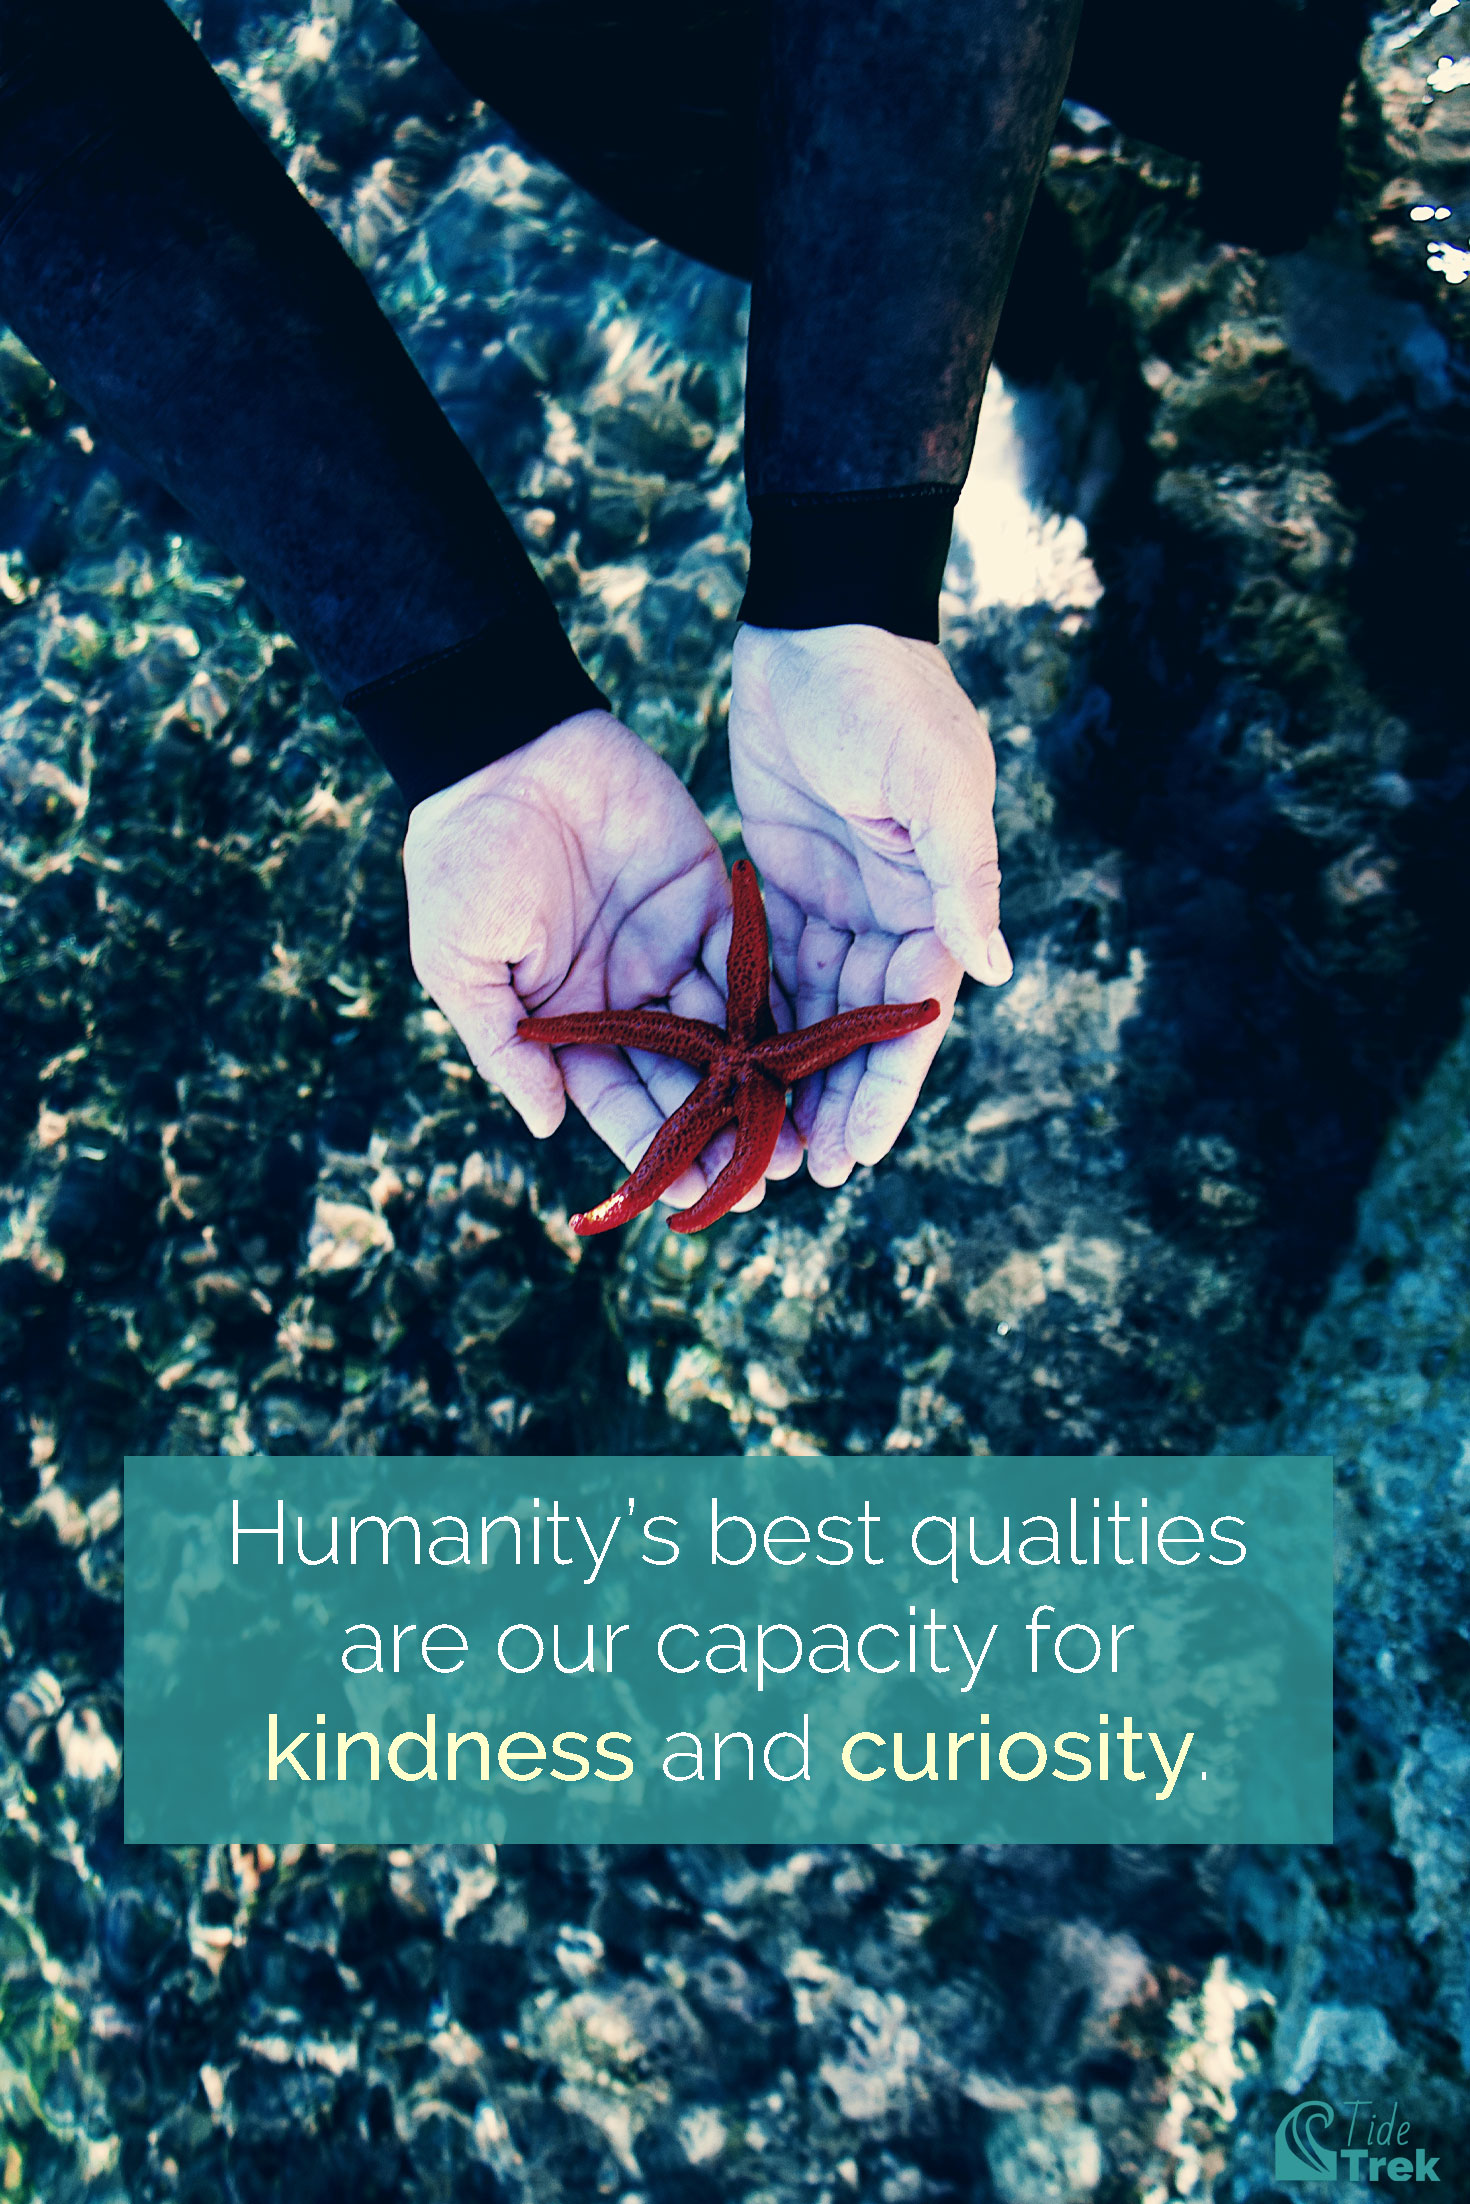 Top-down photo of a person standing in a tide pool wearing a wetsuit and holding a red sea star in their cupped hands. Overlaid text reads, "Humanity's best qualities are our capacity for kindness and curiosity." By Tide Trek.